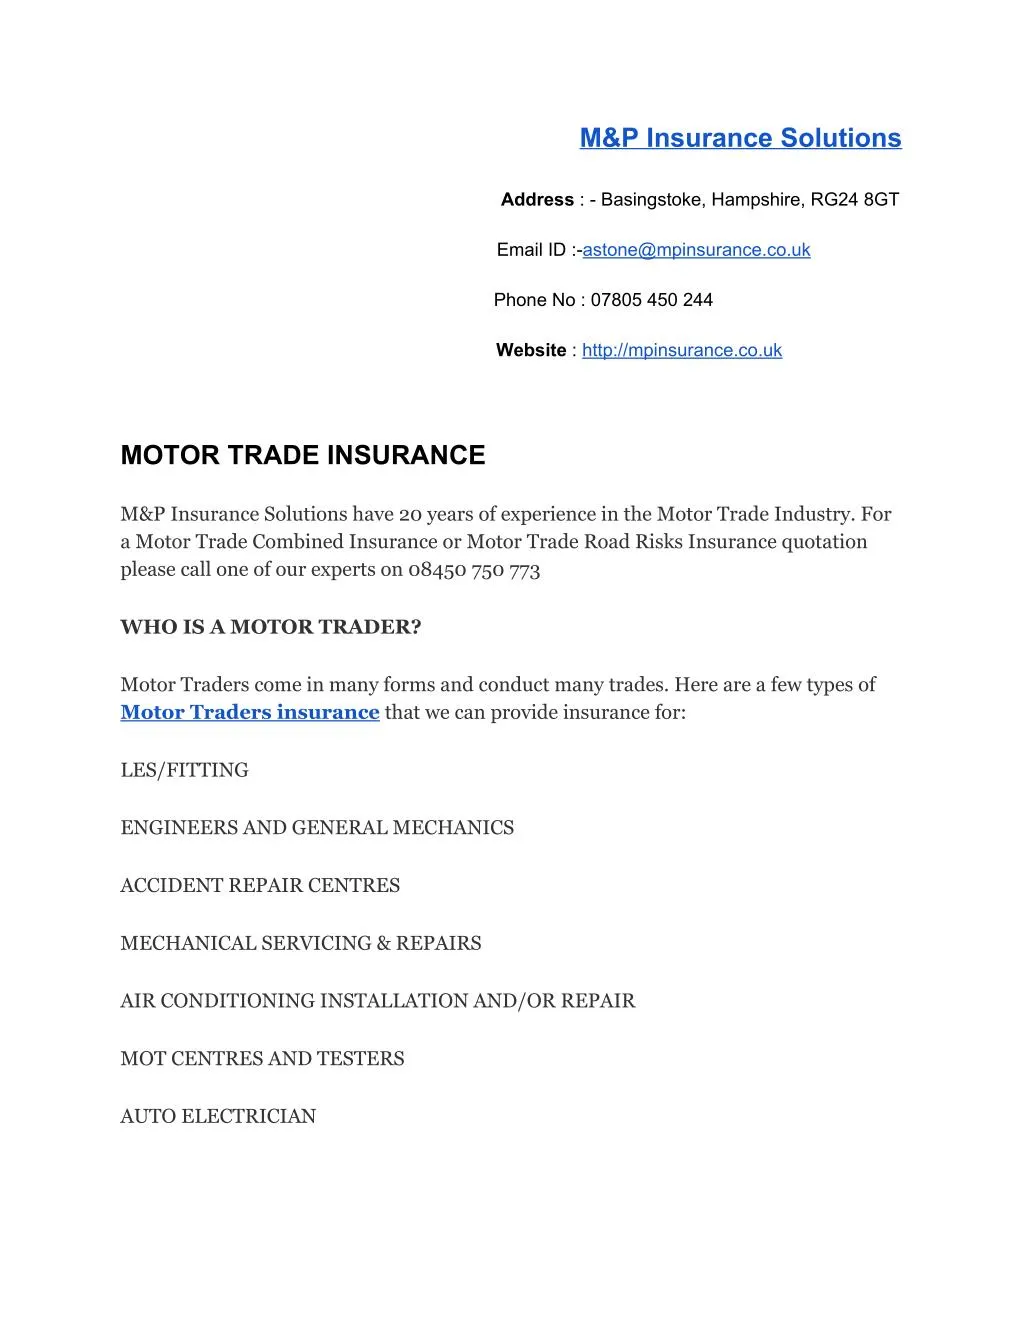 Ppt - Motor Trade Insurance Powerpoint Presentation Free Download - Id7462871